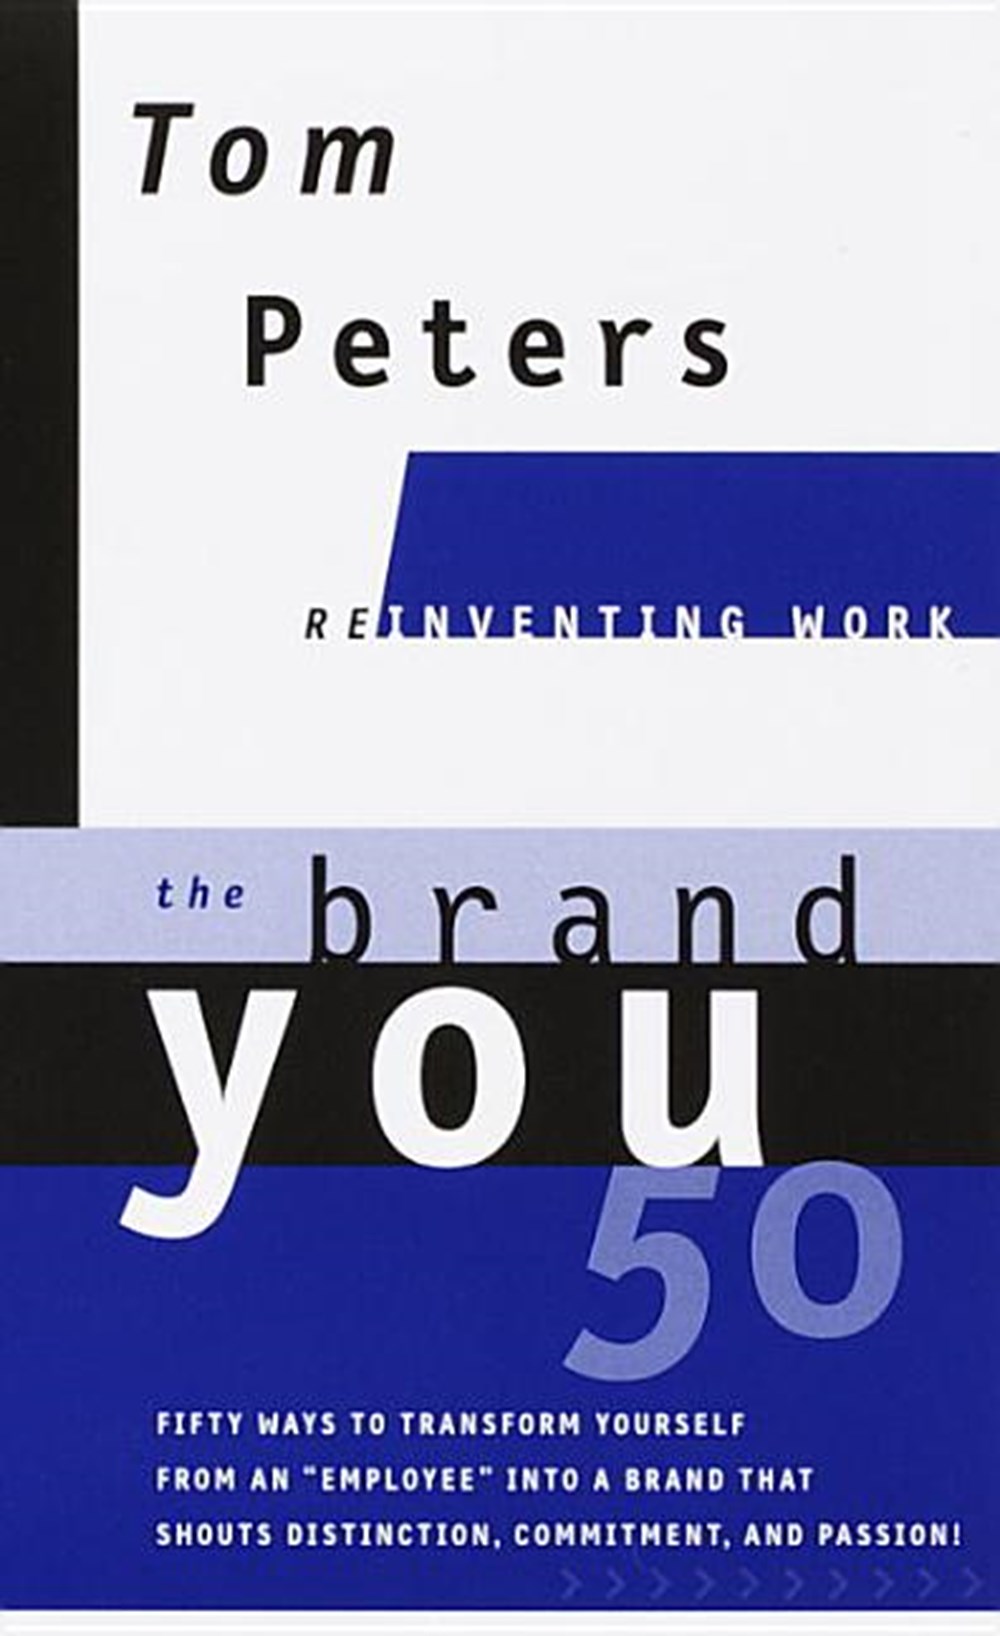 Brand You50 (Reinventing Work): Fifty Ways to Transform Yourself from an Employee Into a Brand That 